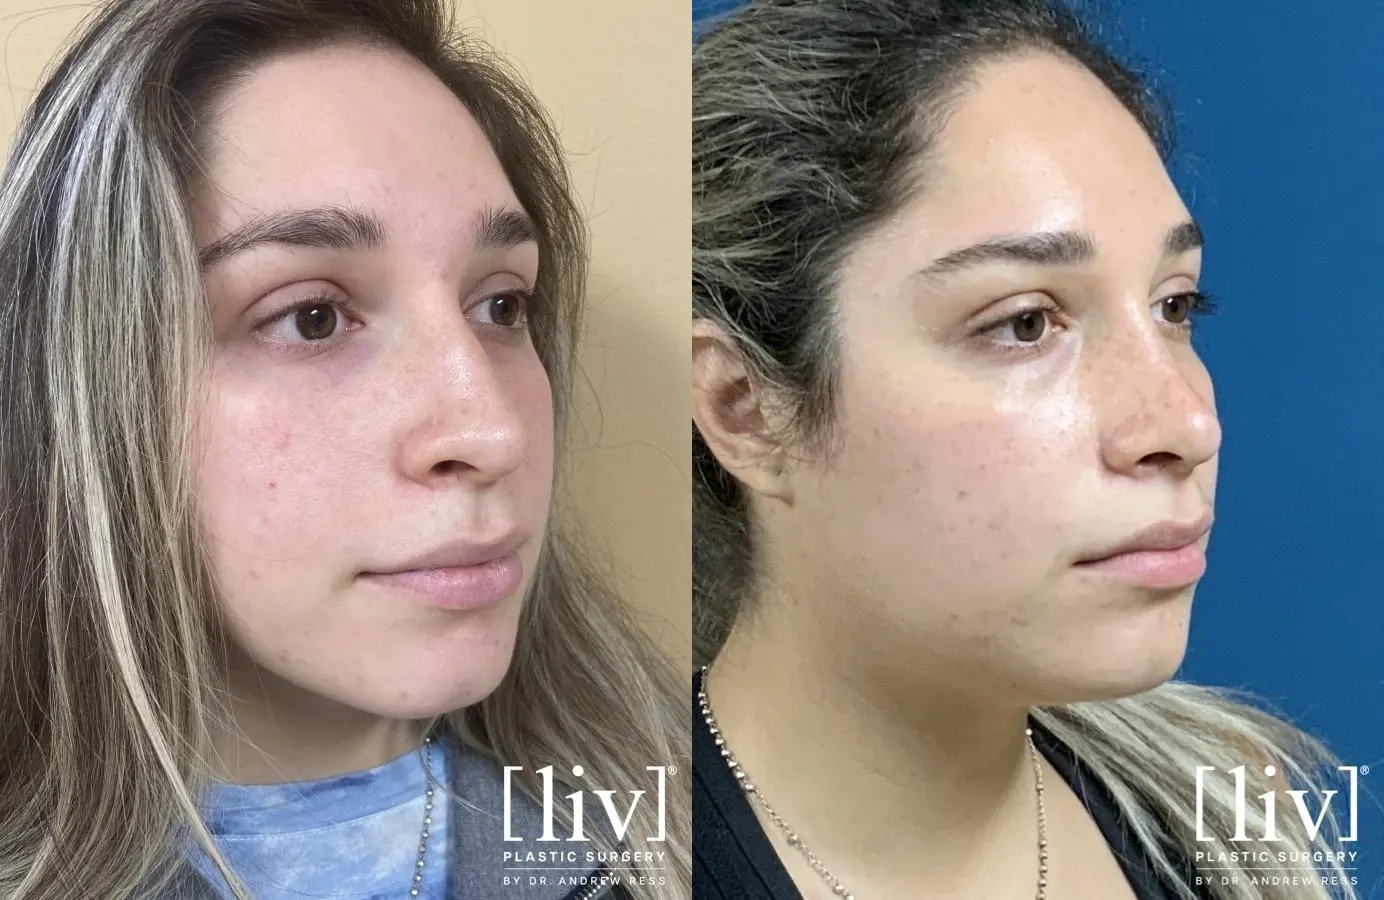 Rhinoplasty: Patient 2 - Before and After 2